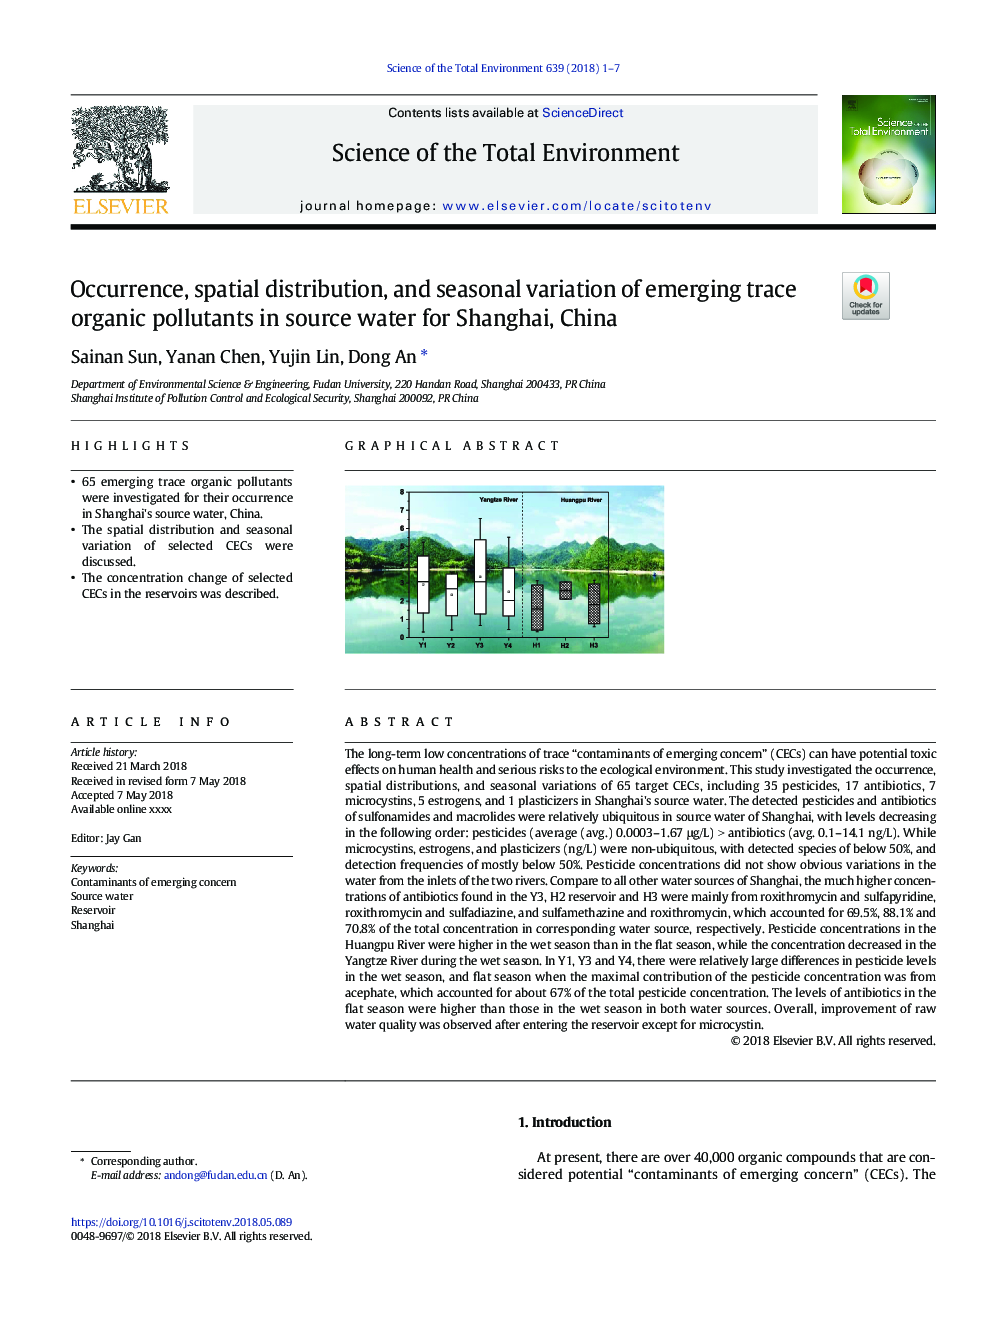 Occurrence, spatial distribution, and seasonal variation of emerging trace organic pollutants in source water for Shanghai, China